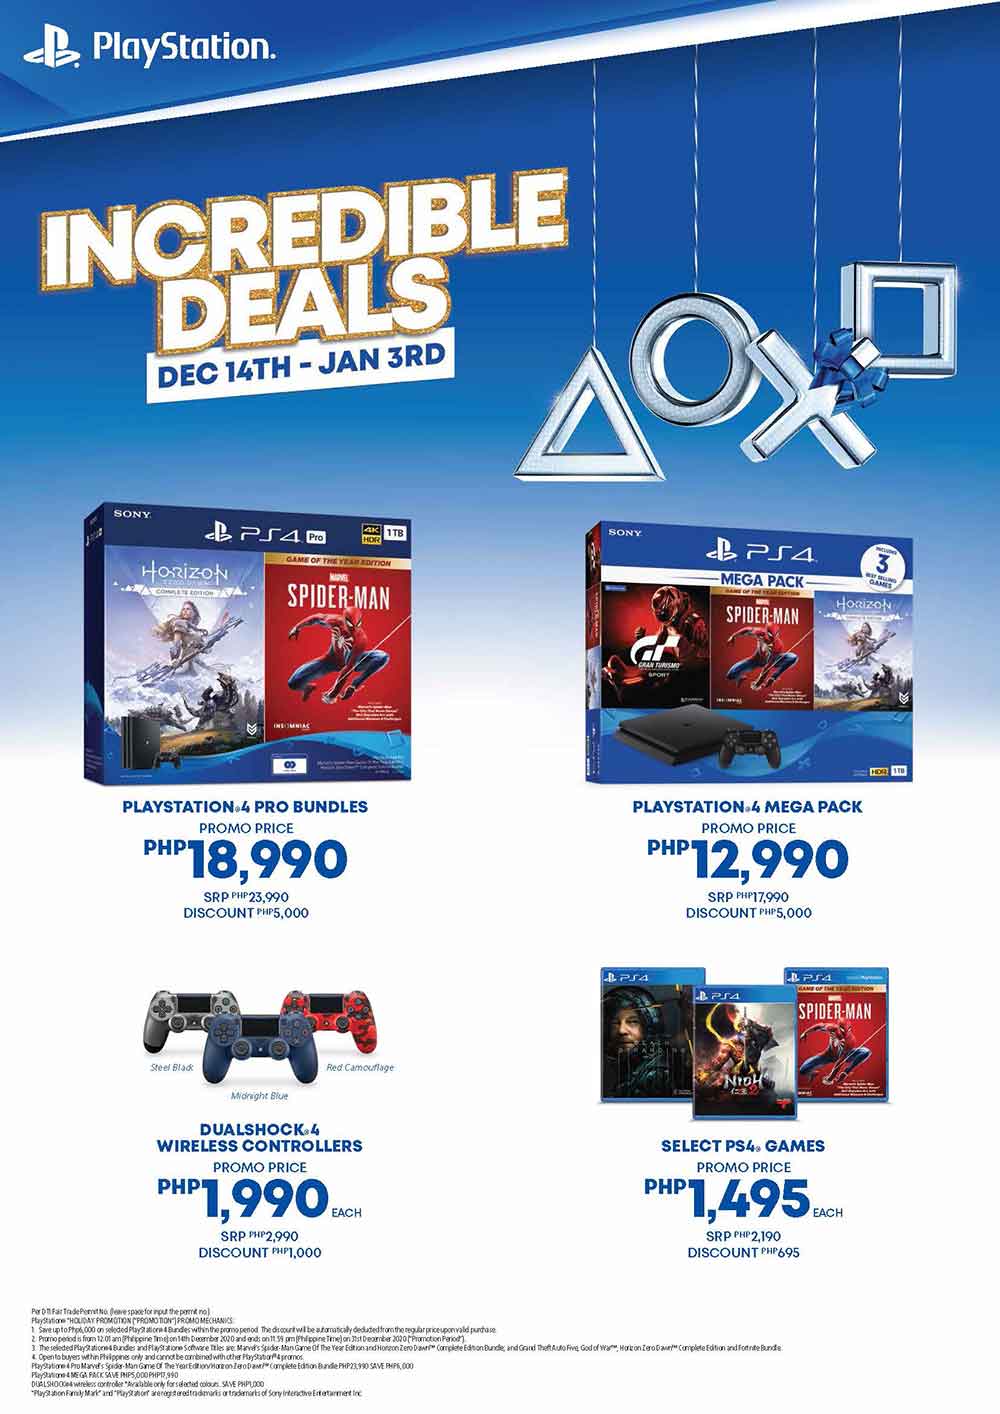 PlayStation Incredible Deals 2020 Poster